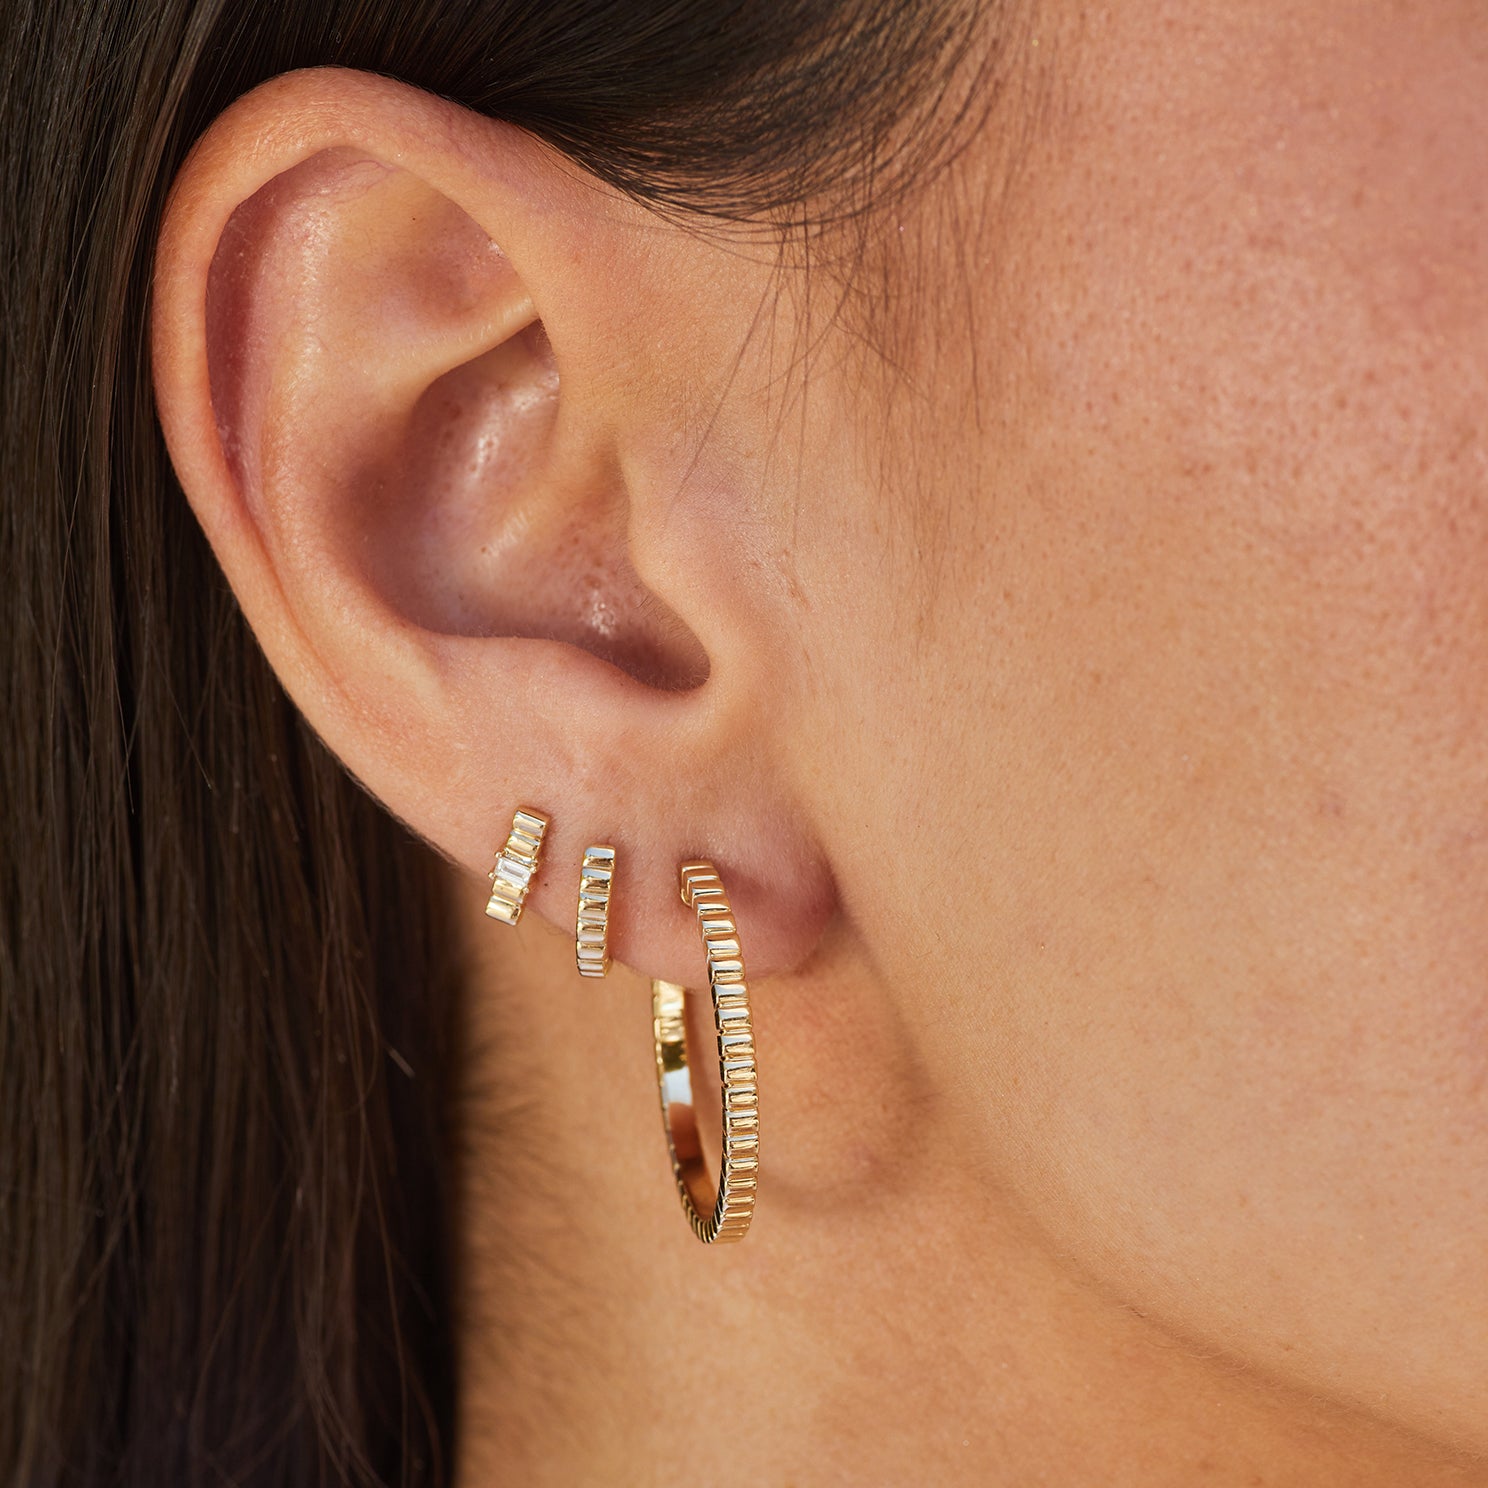 Diamond & Gold Fluted Bar Stud Earring in 14k yellow gold on third earring hole next to fluted huggie and fluted hoop earring on ear of model